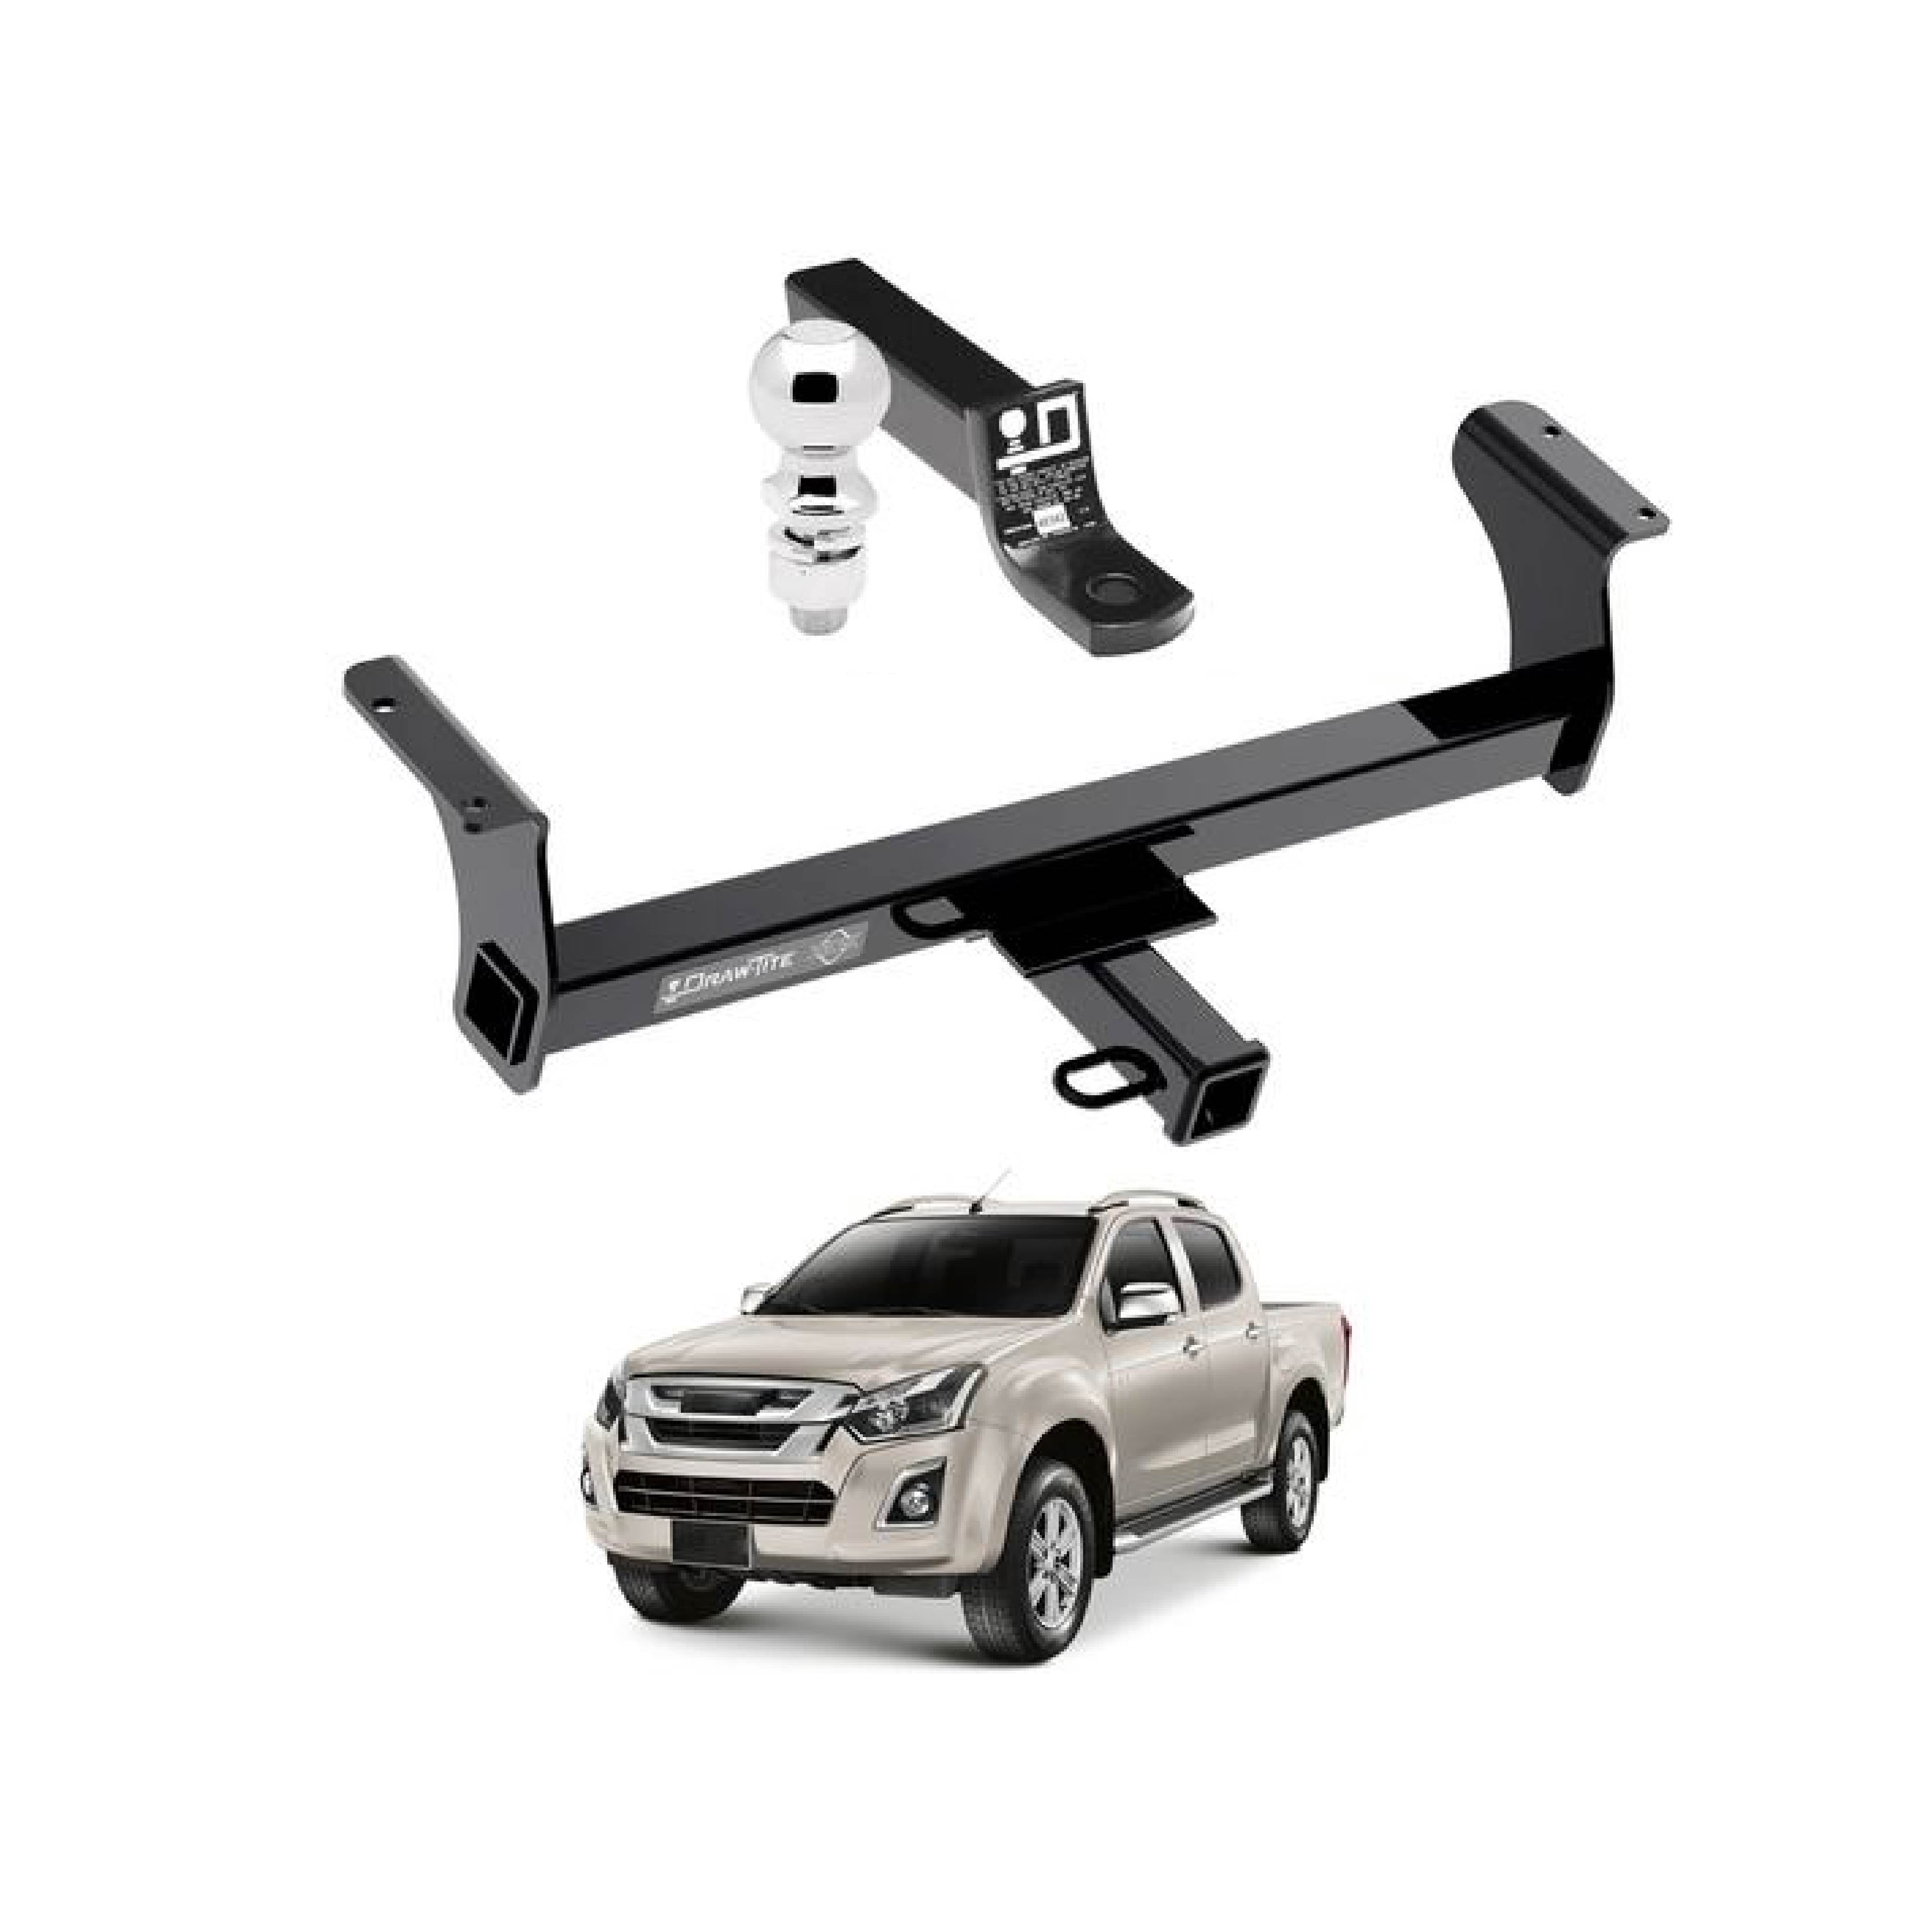 Draw Tite Towing Kit (Frame Receiver + Ball Mount) for 2013-2019 Isuzu D-Max